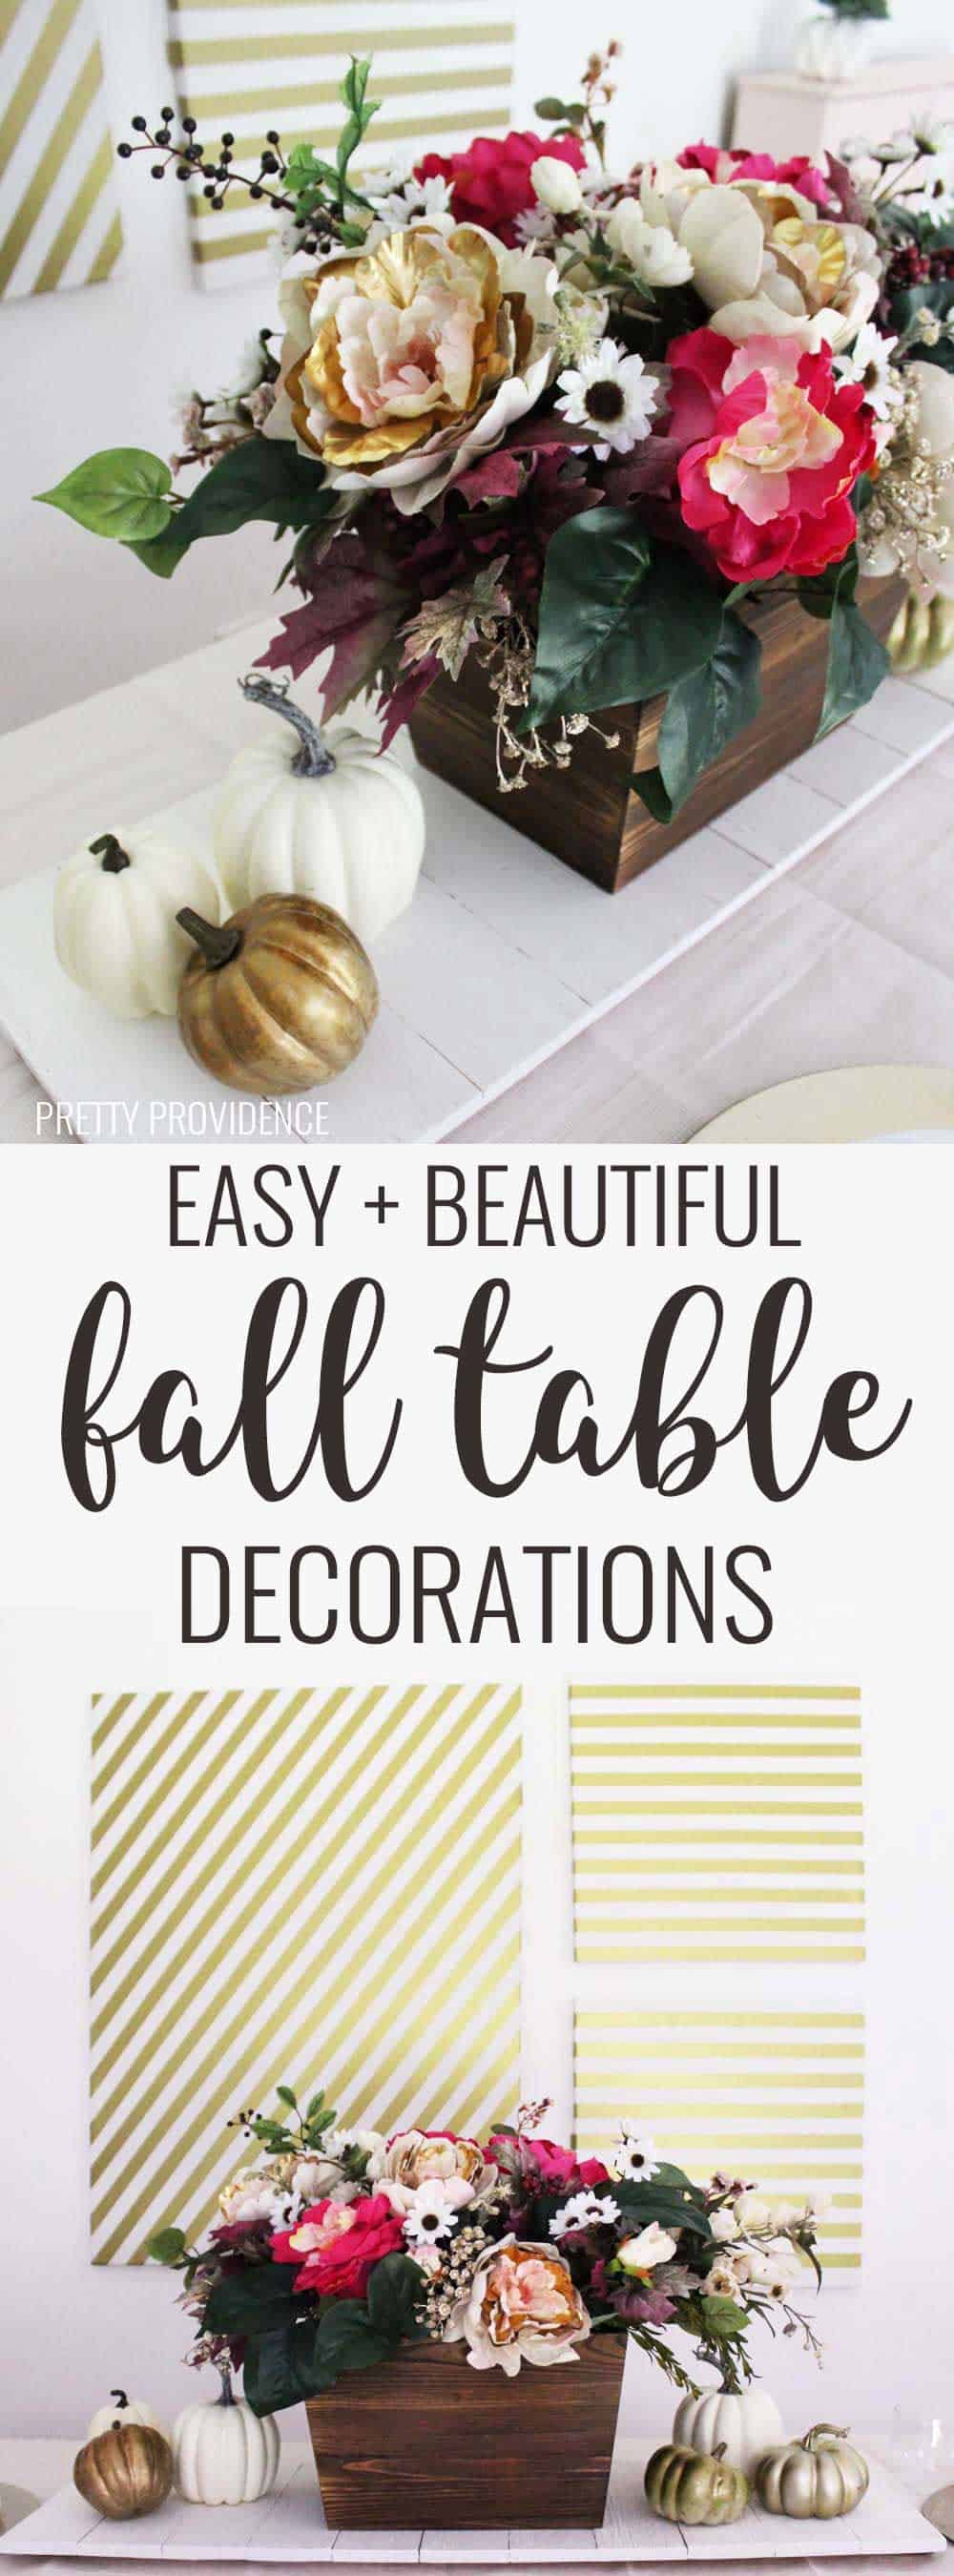 This fall table decor is perfect for thanksgiving!! You can't go wrong with a floral centerpiece and gold table decorations!